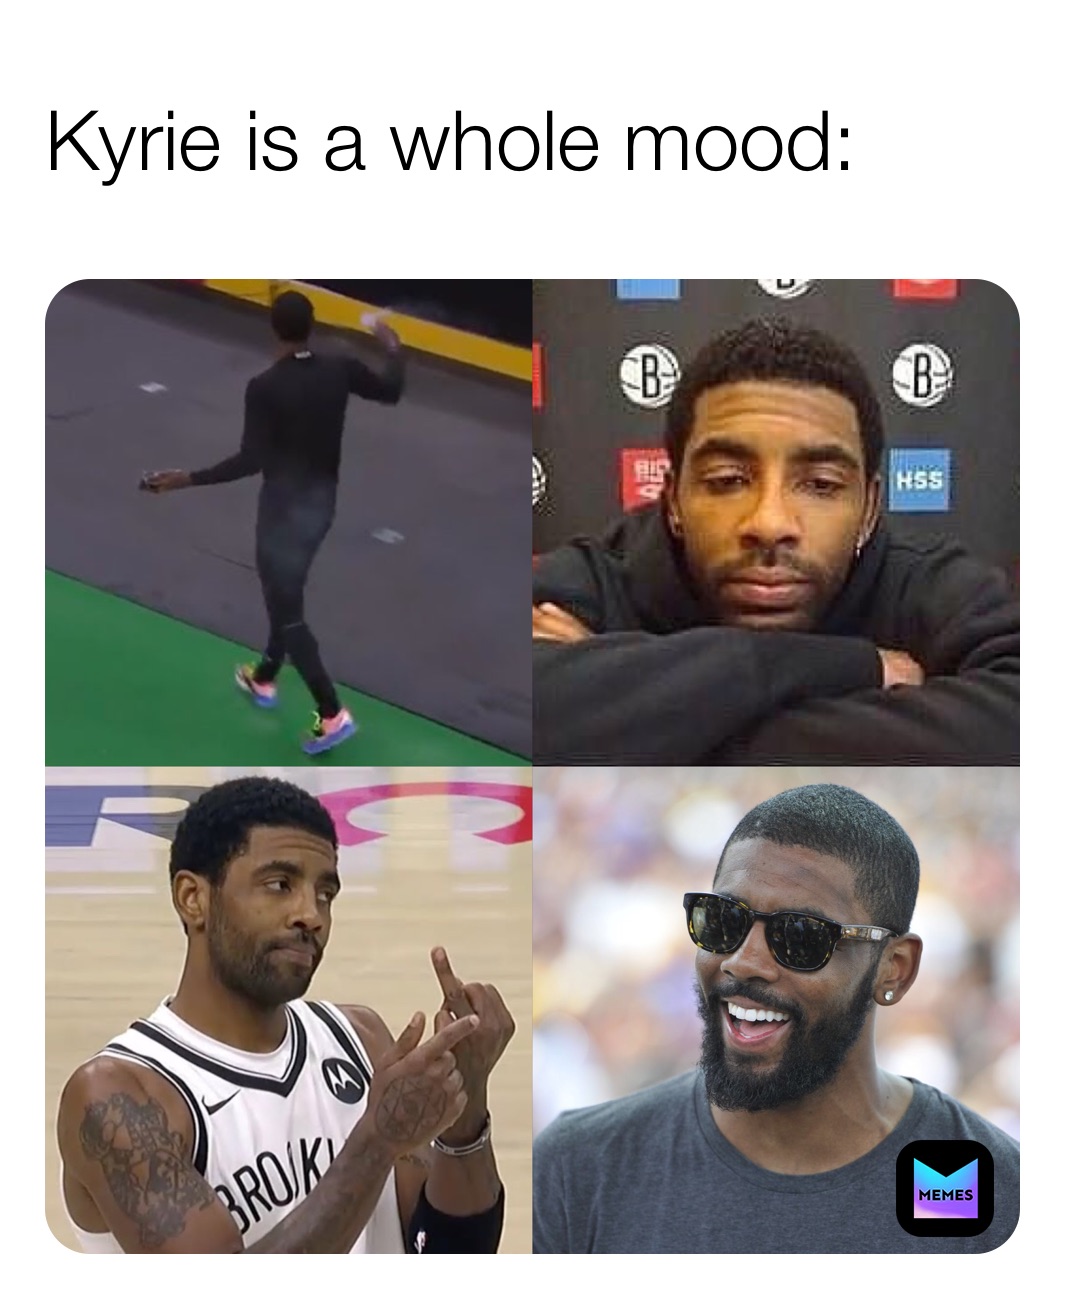 Kyrie is a whole mood: